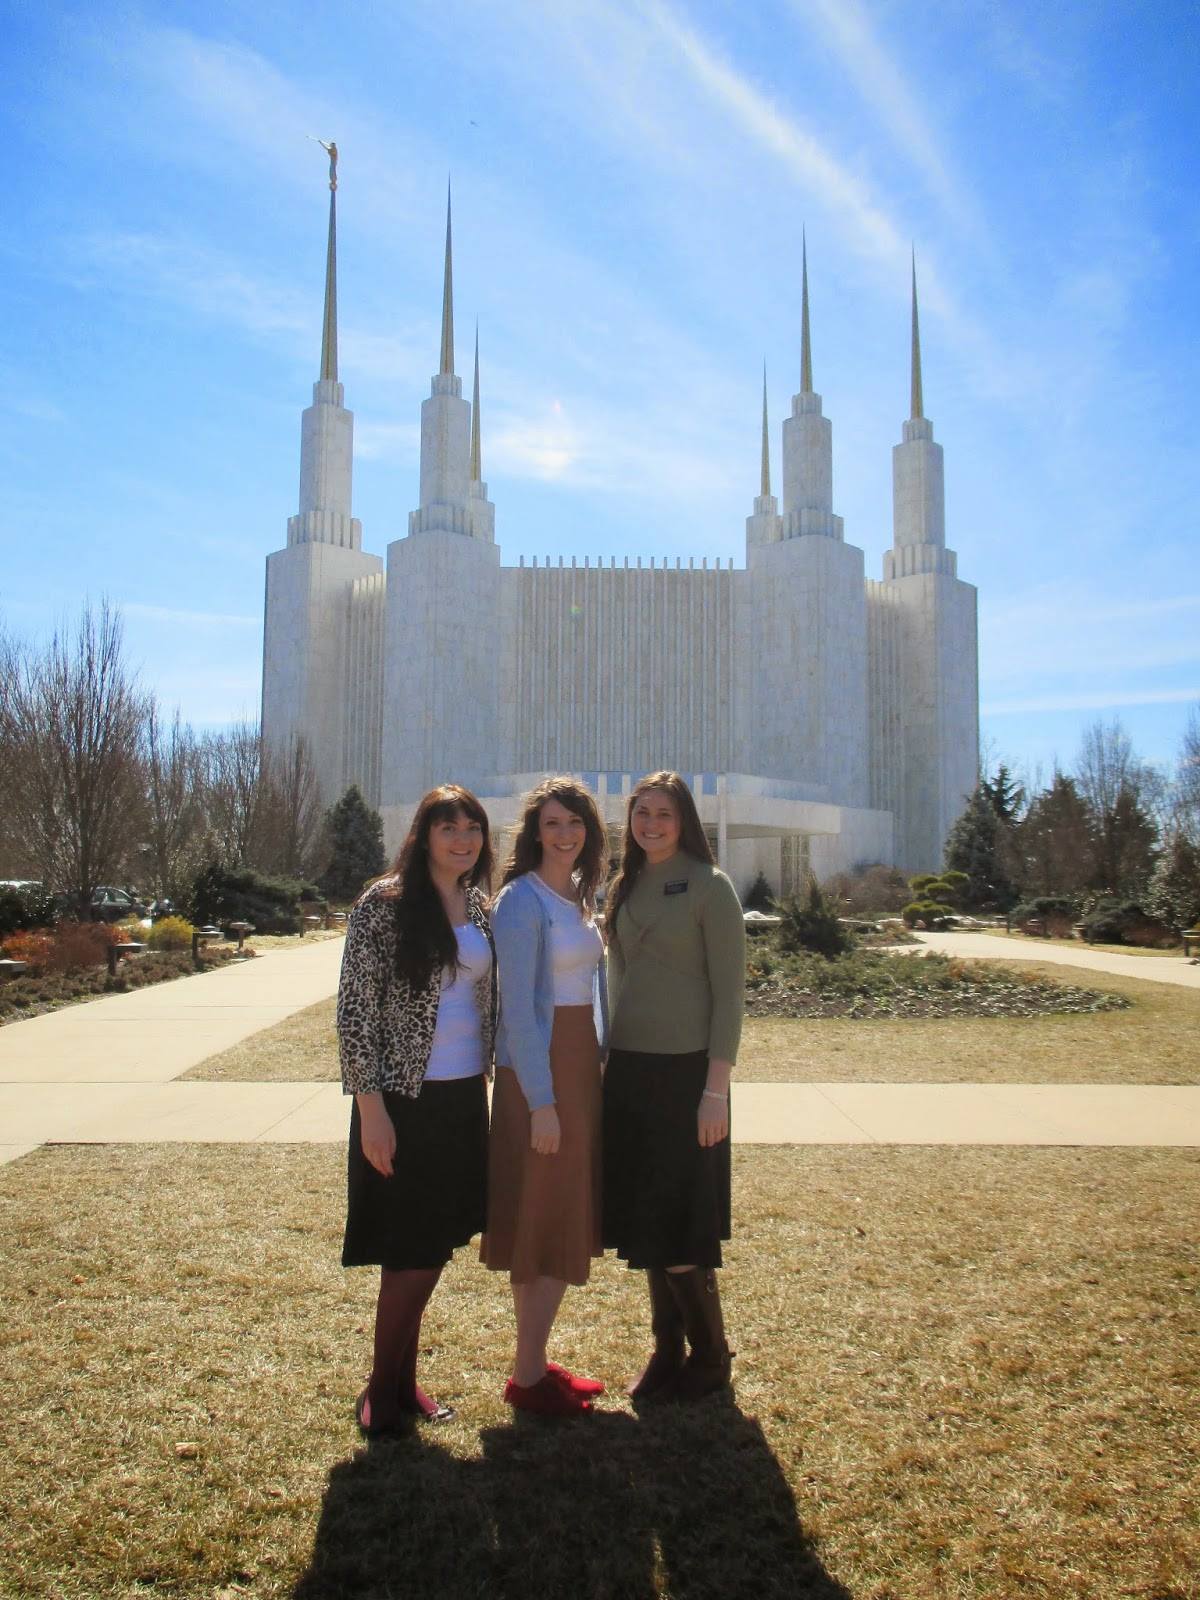 Hailey Maire (center), with her companions Briana Whiteford (left) and Heiteaarri Bertholon (right). 